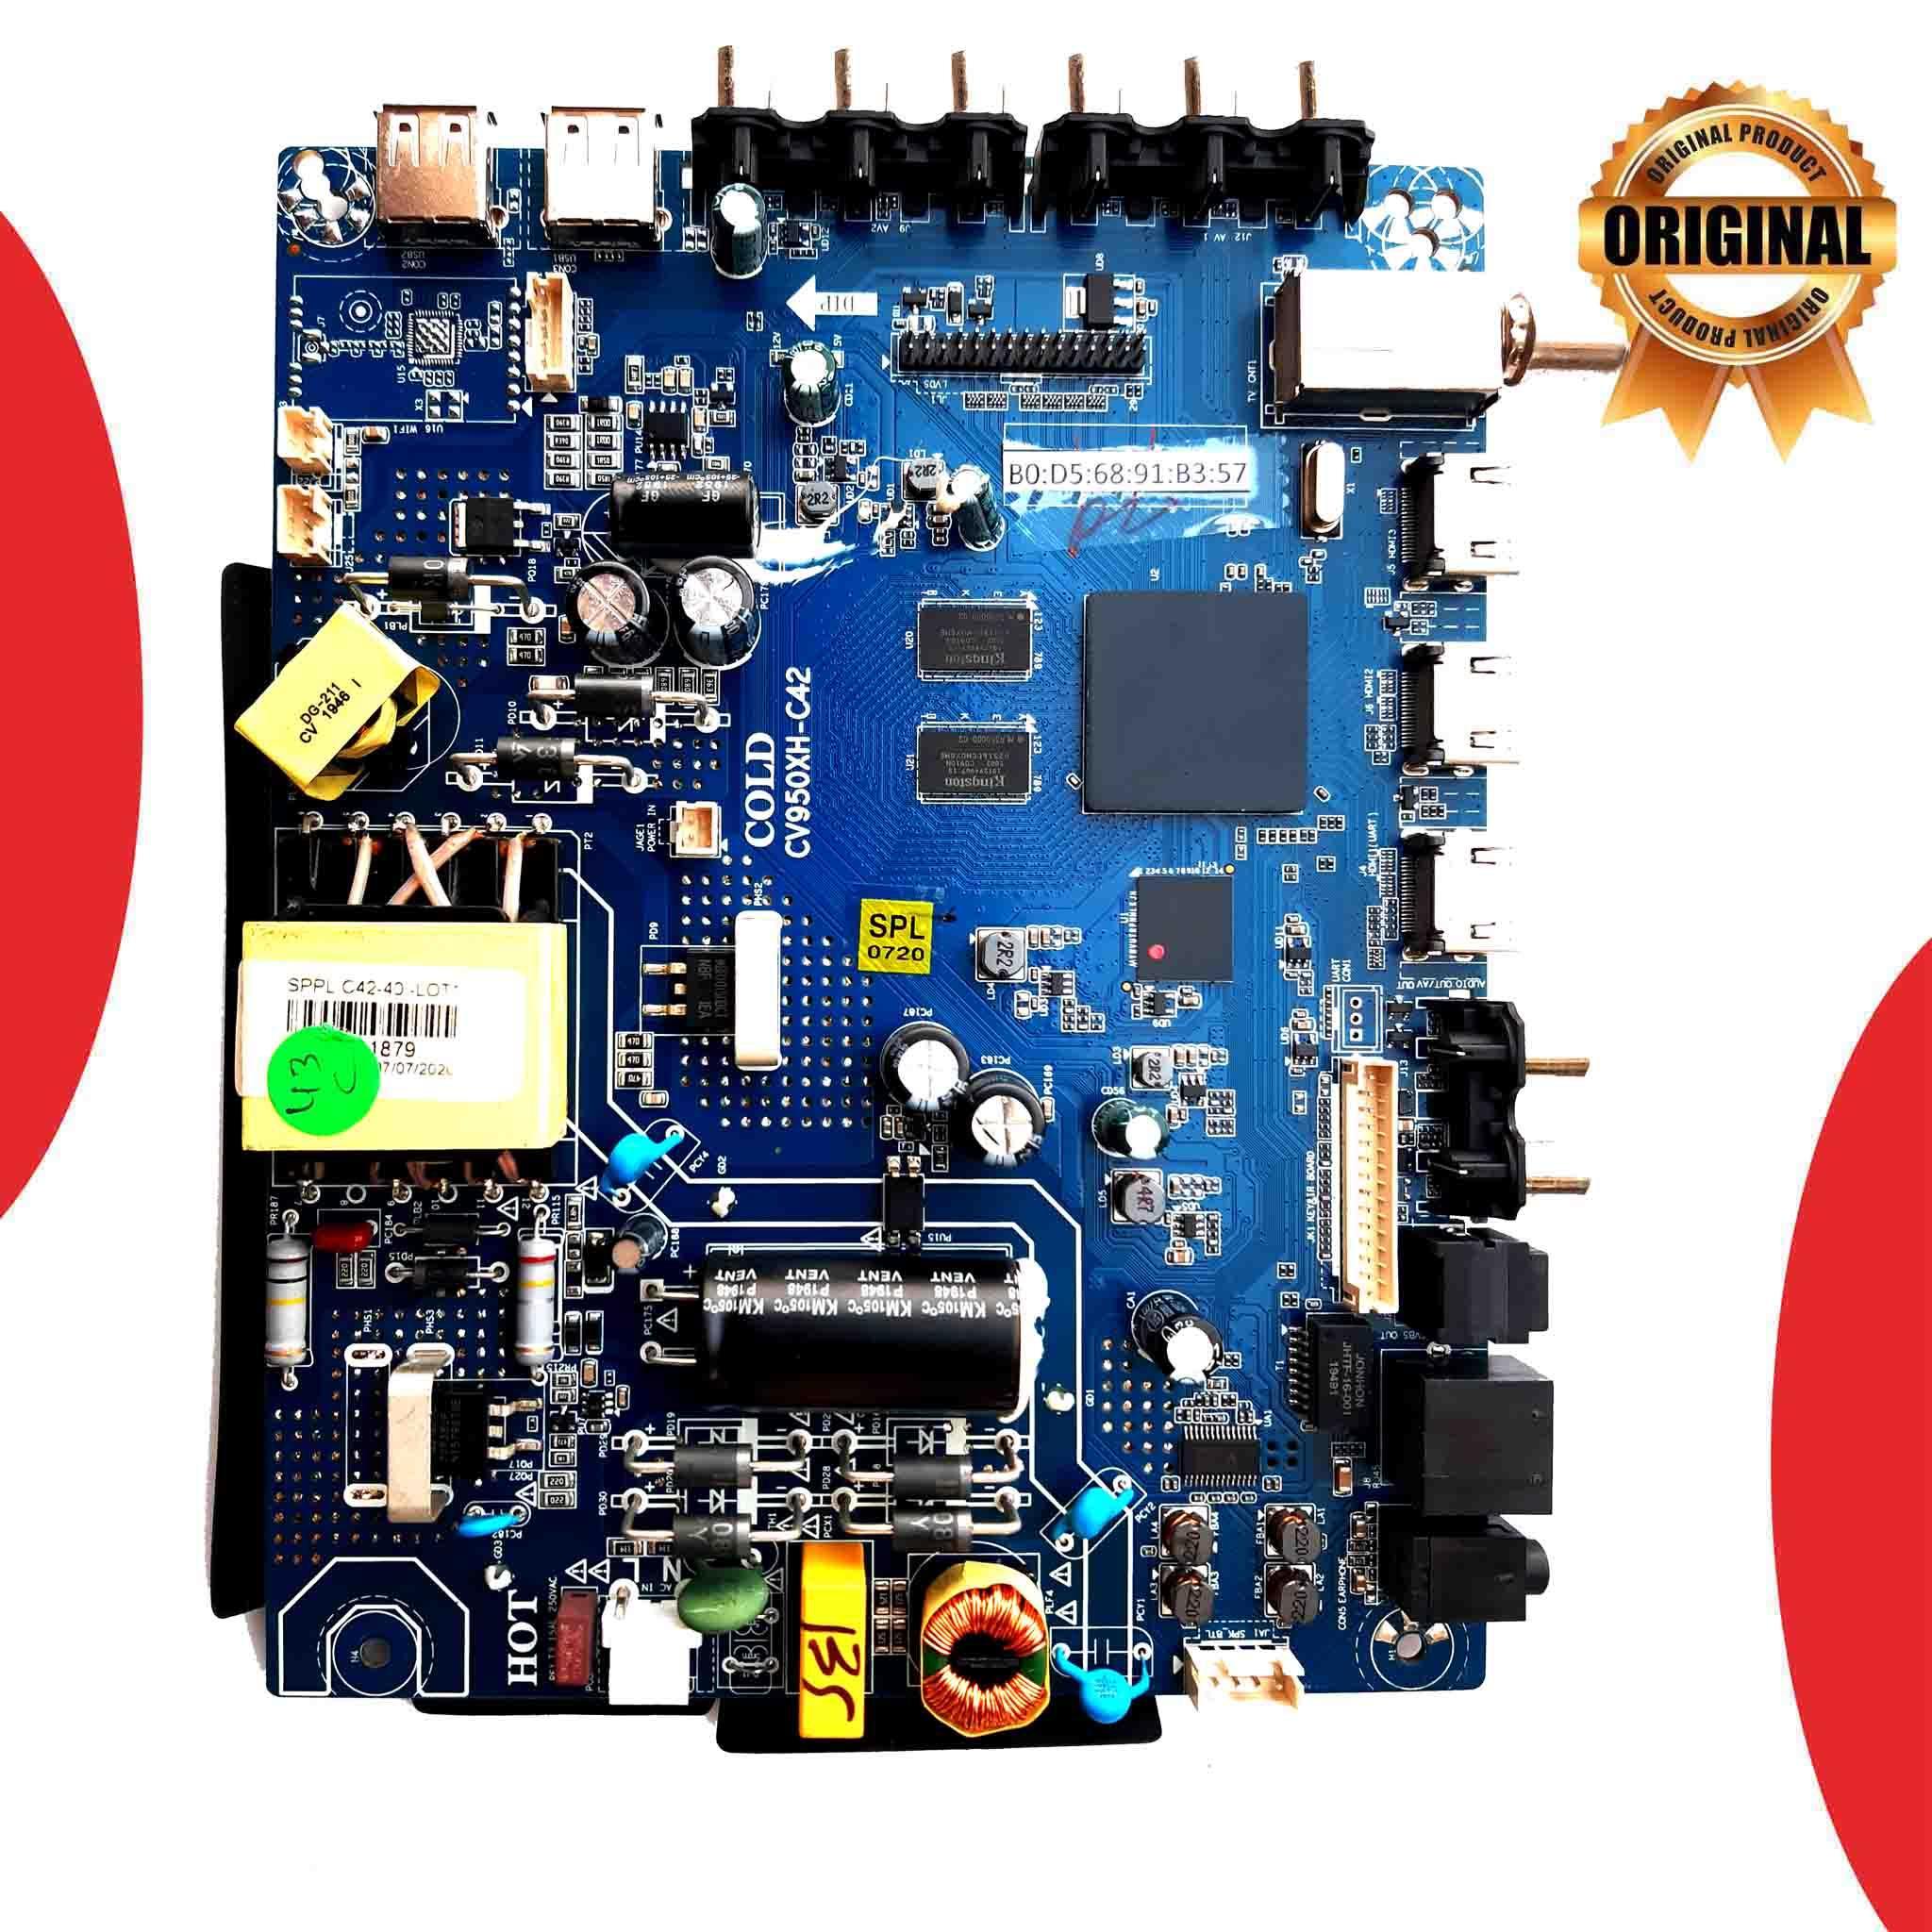 Model 43TH0099 Thomson LED TV Motherboard - Great Bharat Electronics